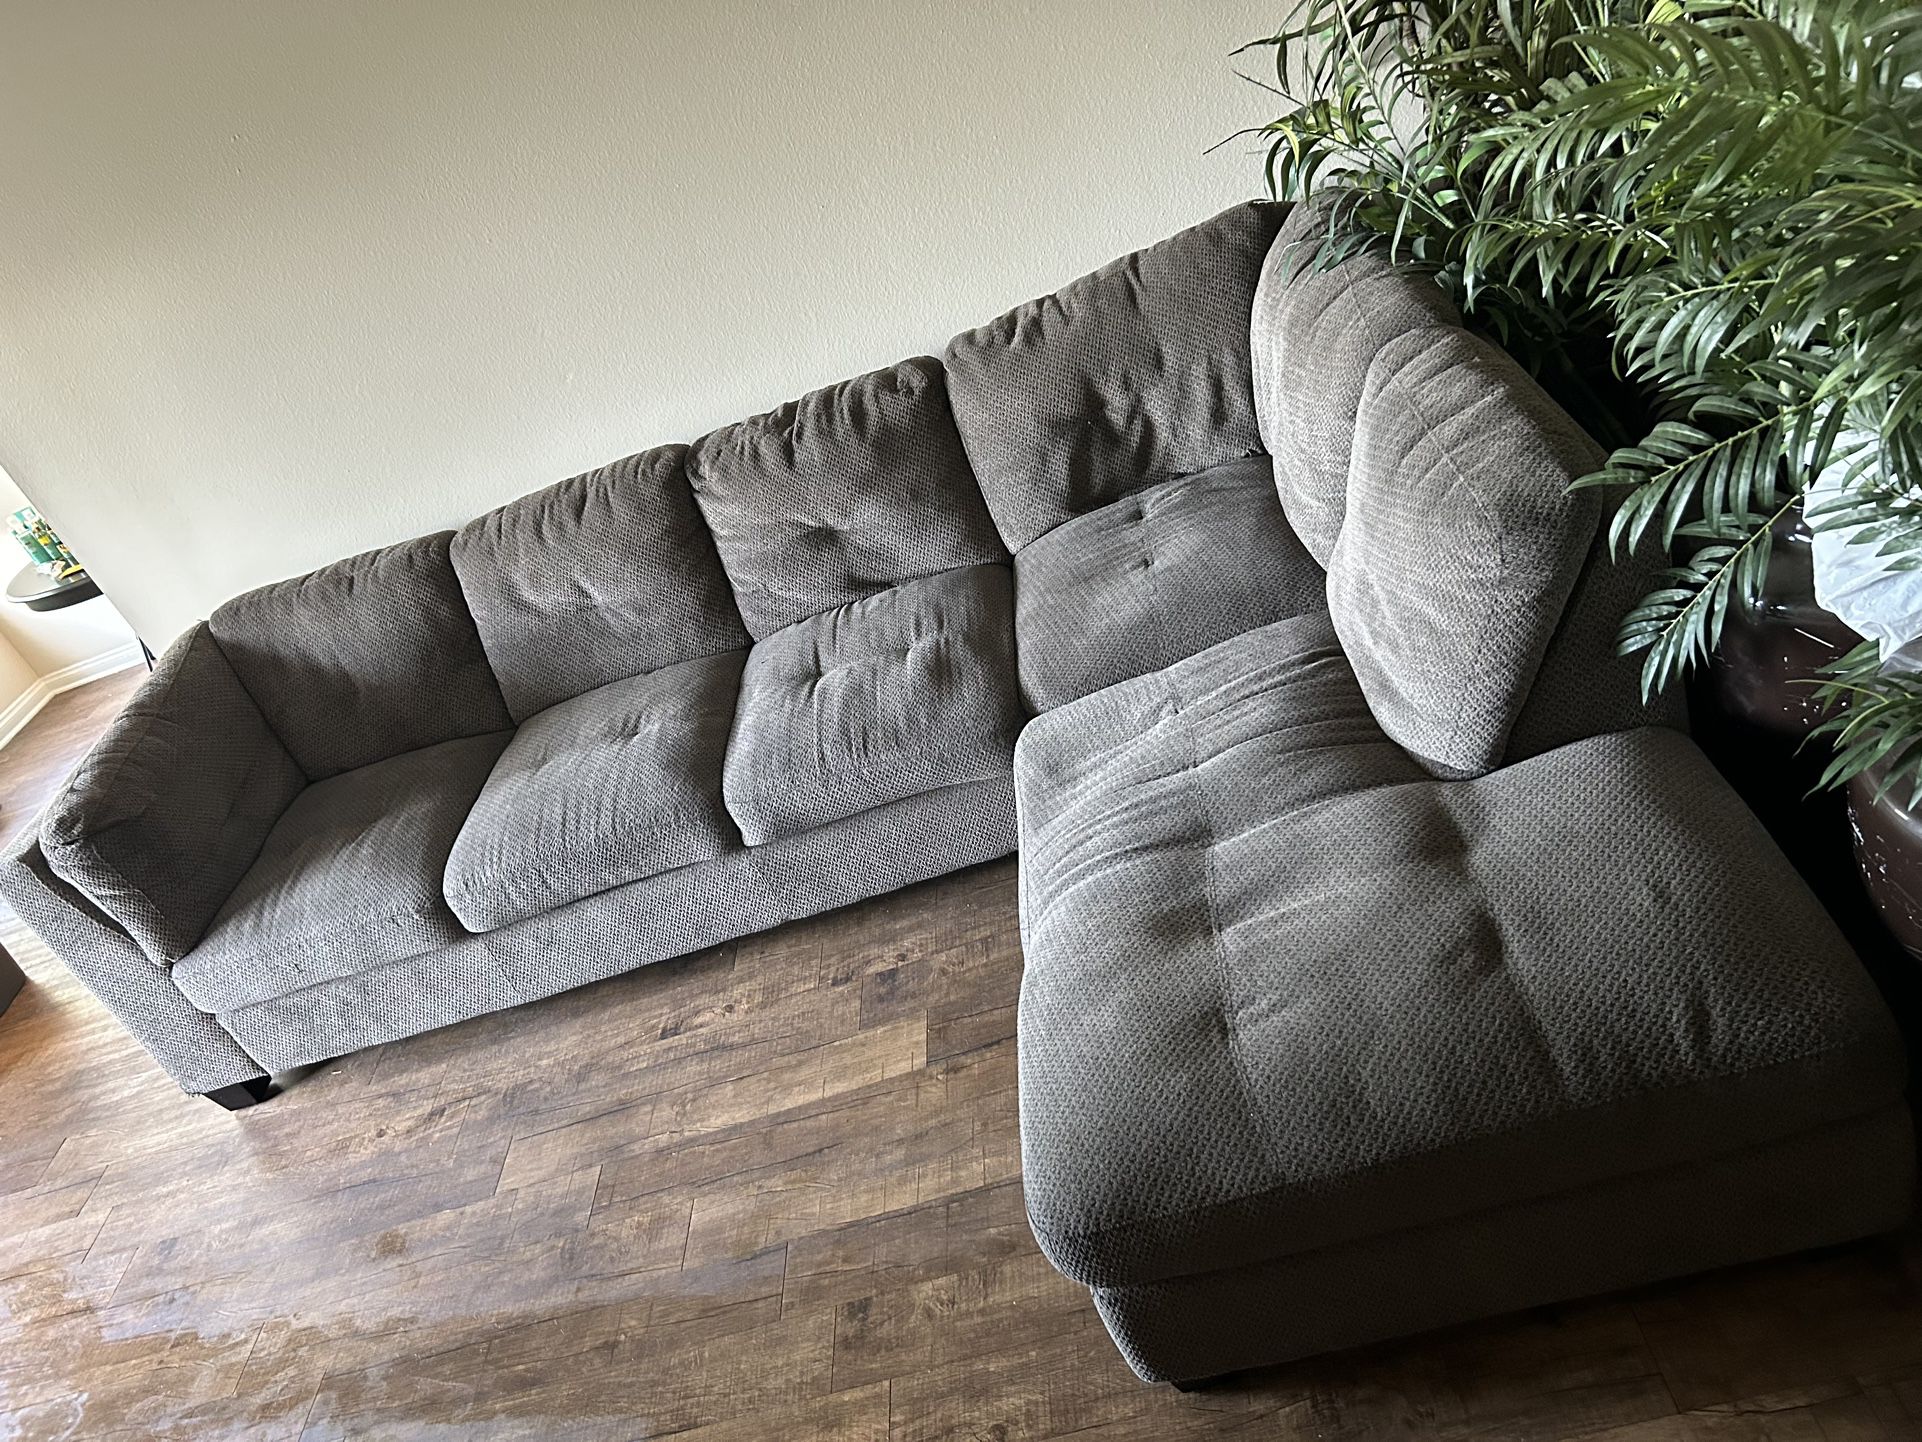 Couch for Sell